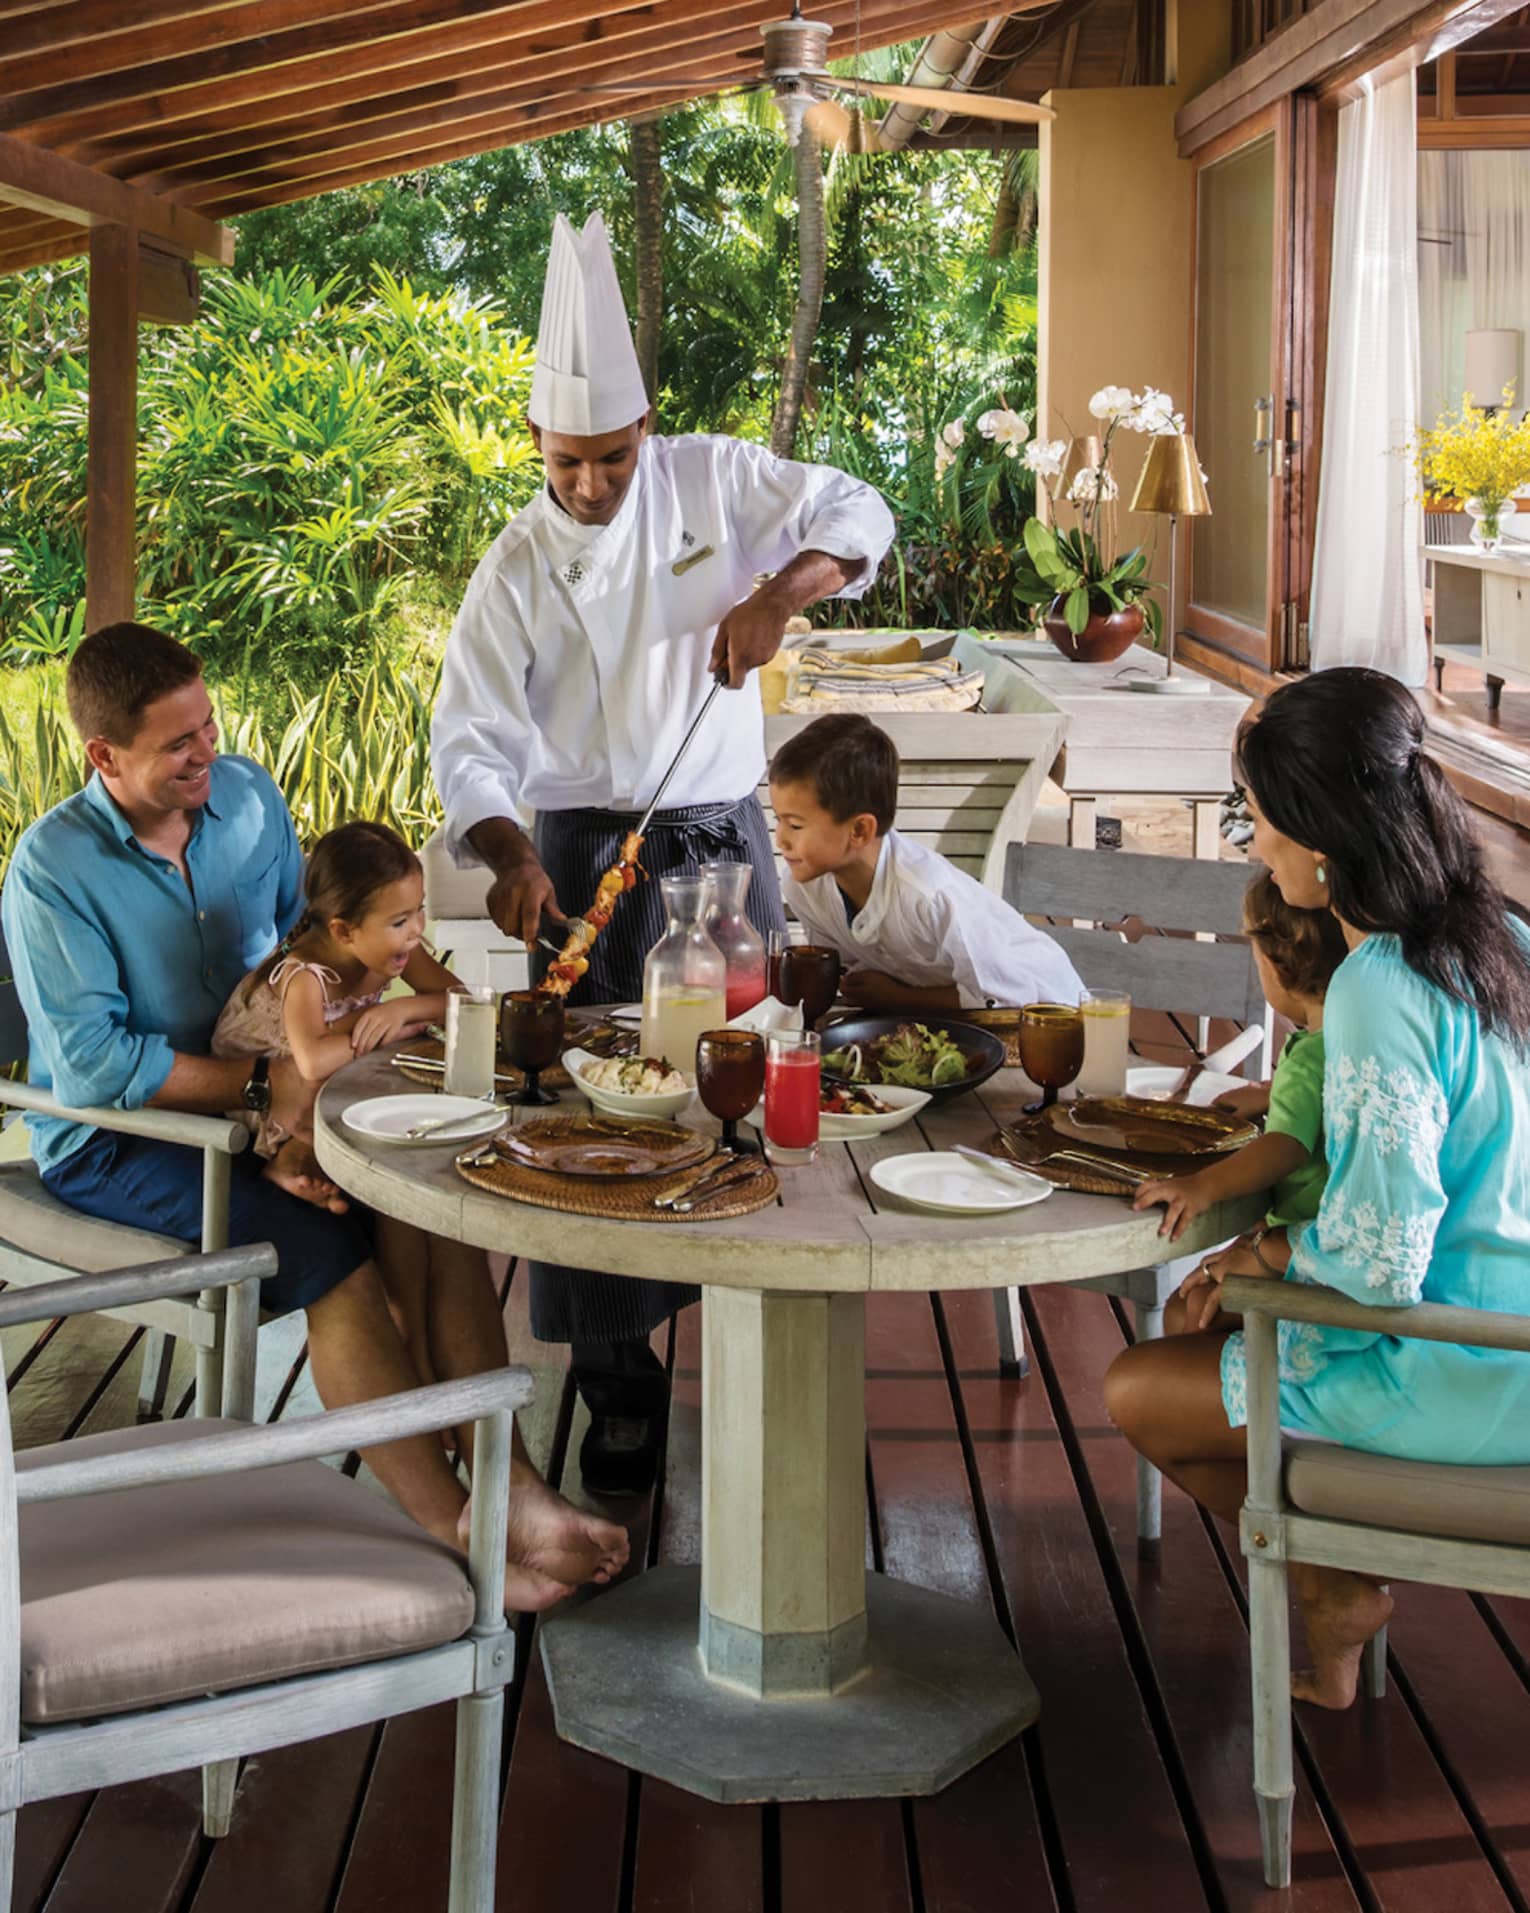 Chef in uniform presents meat skewer to family around table on Beach Villa patio